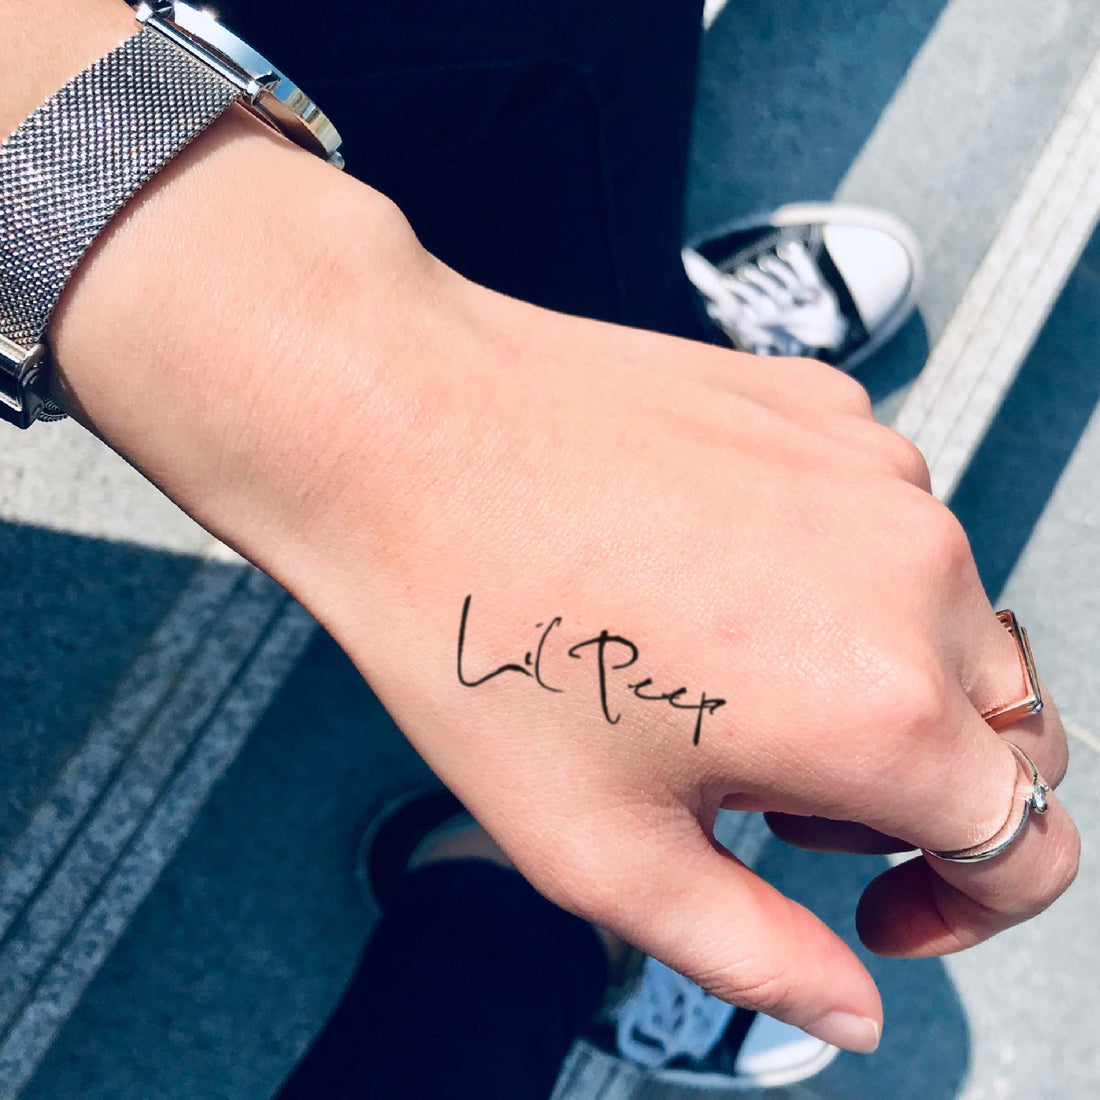 Lil Peep custom temporary tattoo sticker design idea inspiration meanings removal arm wrist hand words font name signature calligraphy lyrics tour concert outfits merch accessory gift souvenir costumes wear dress up code